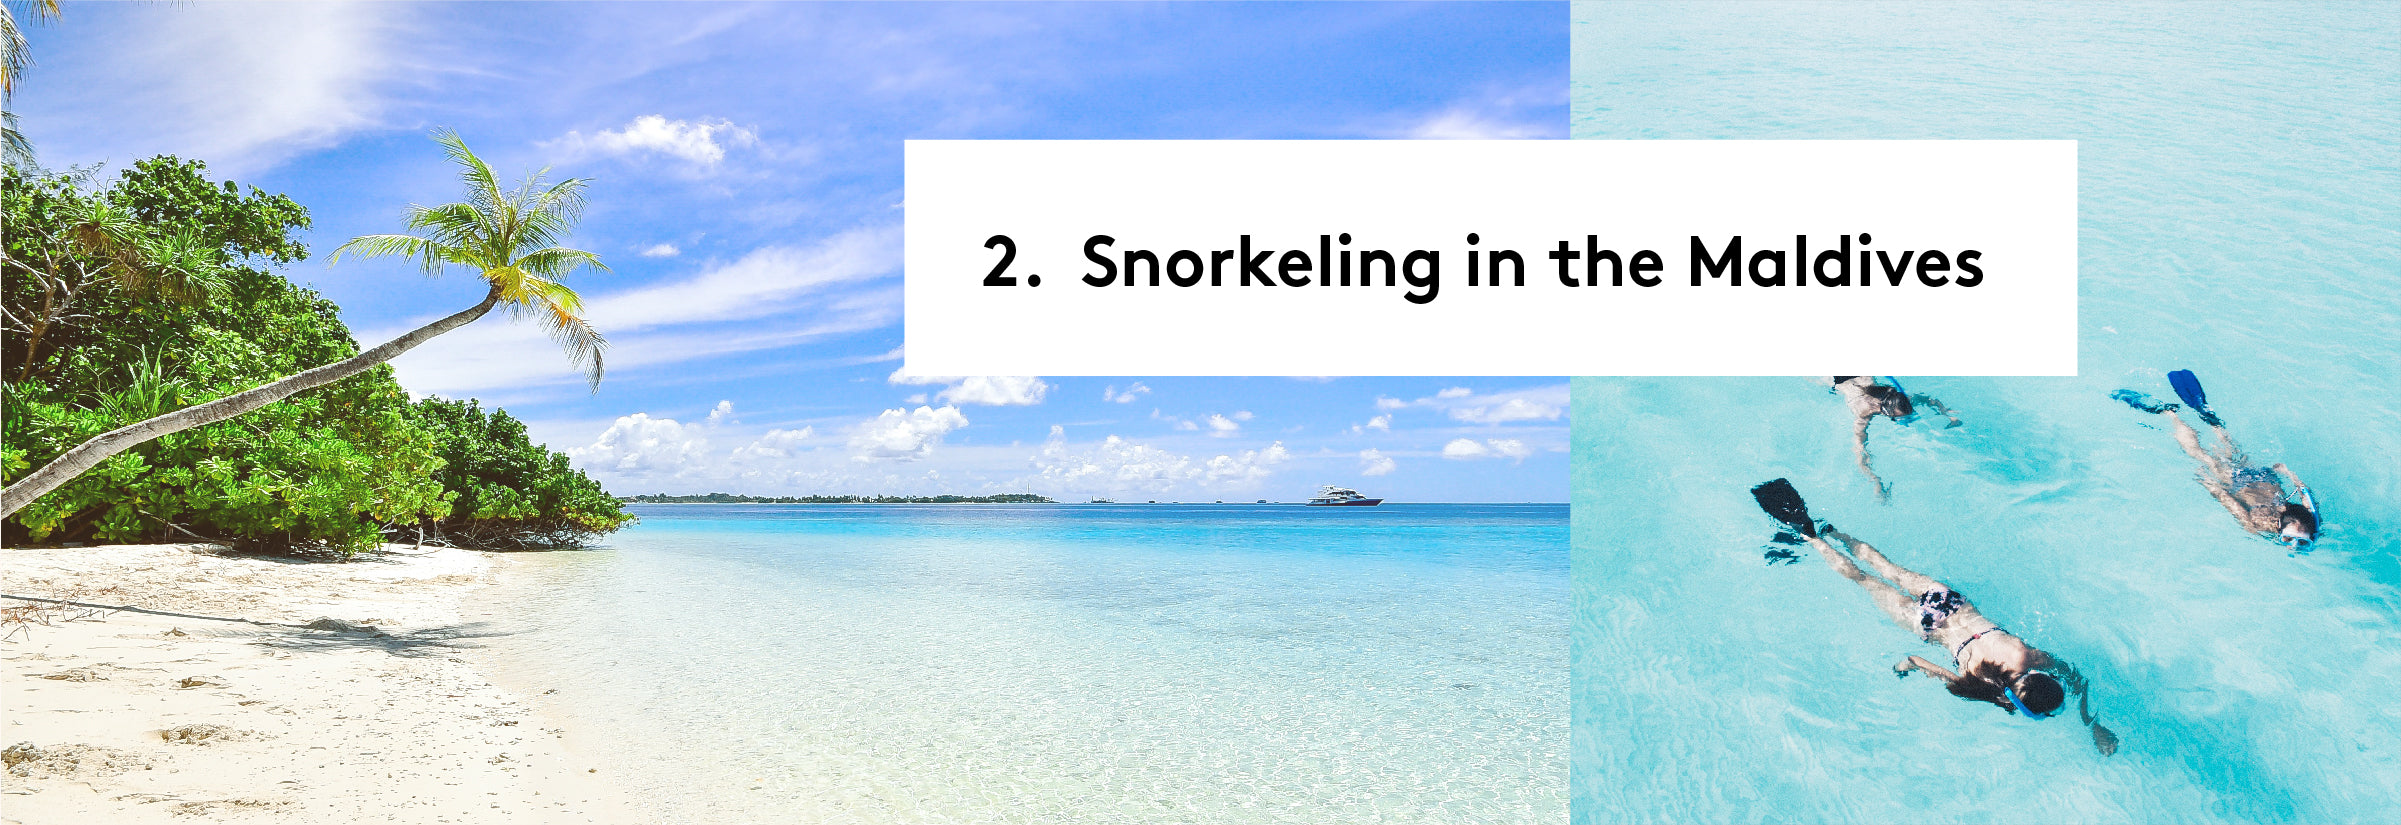 2. Snorkeling in the Maldives